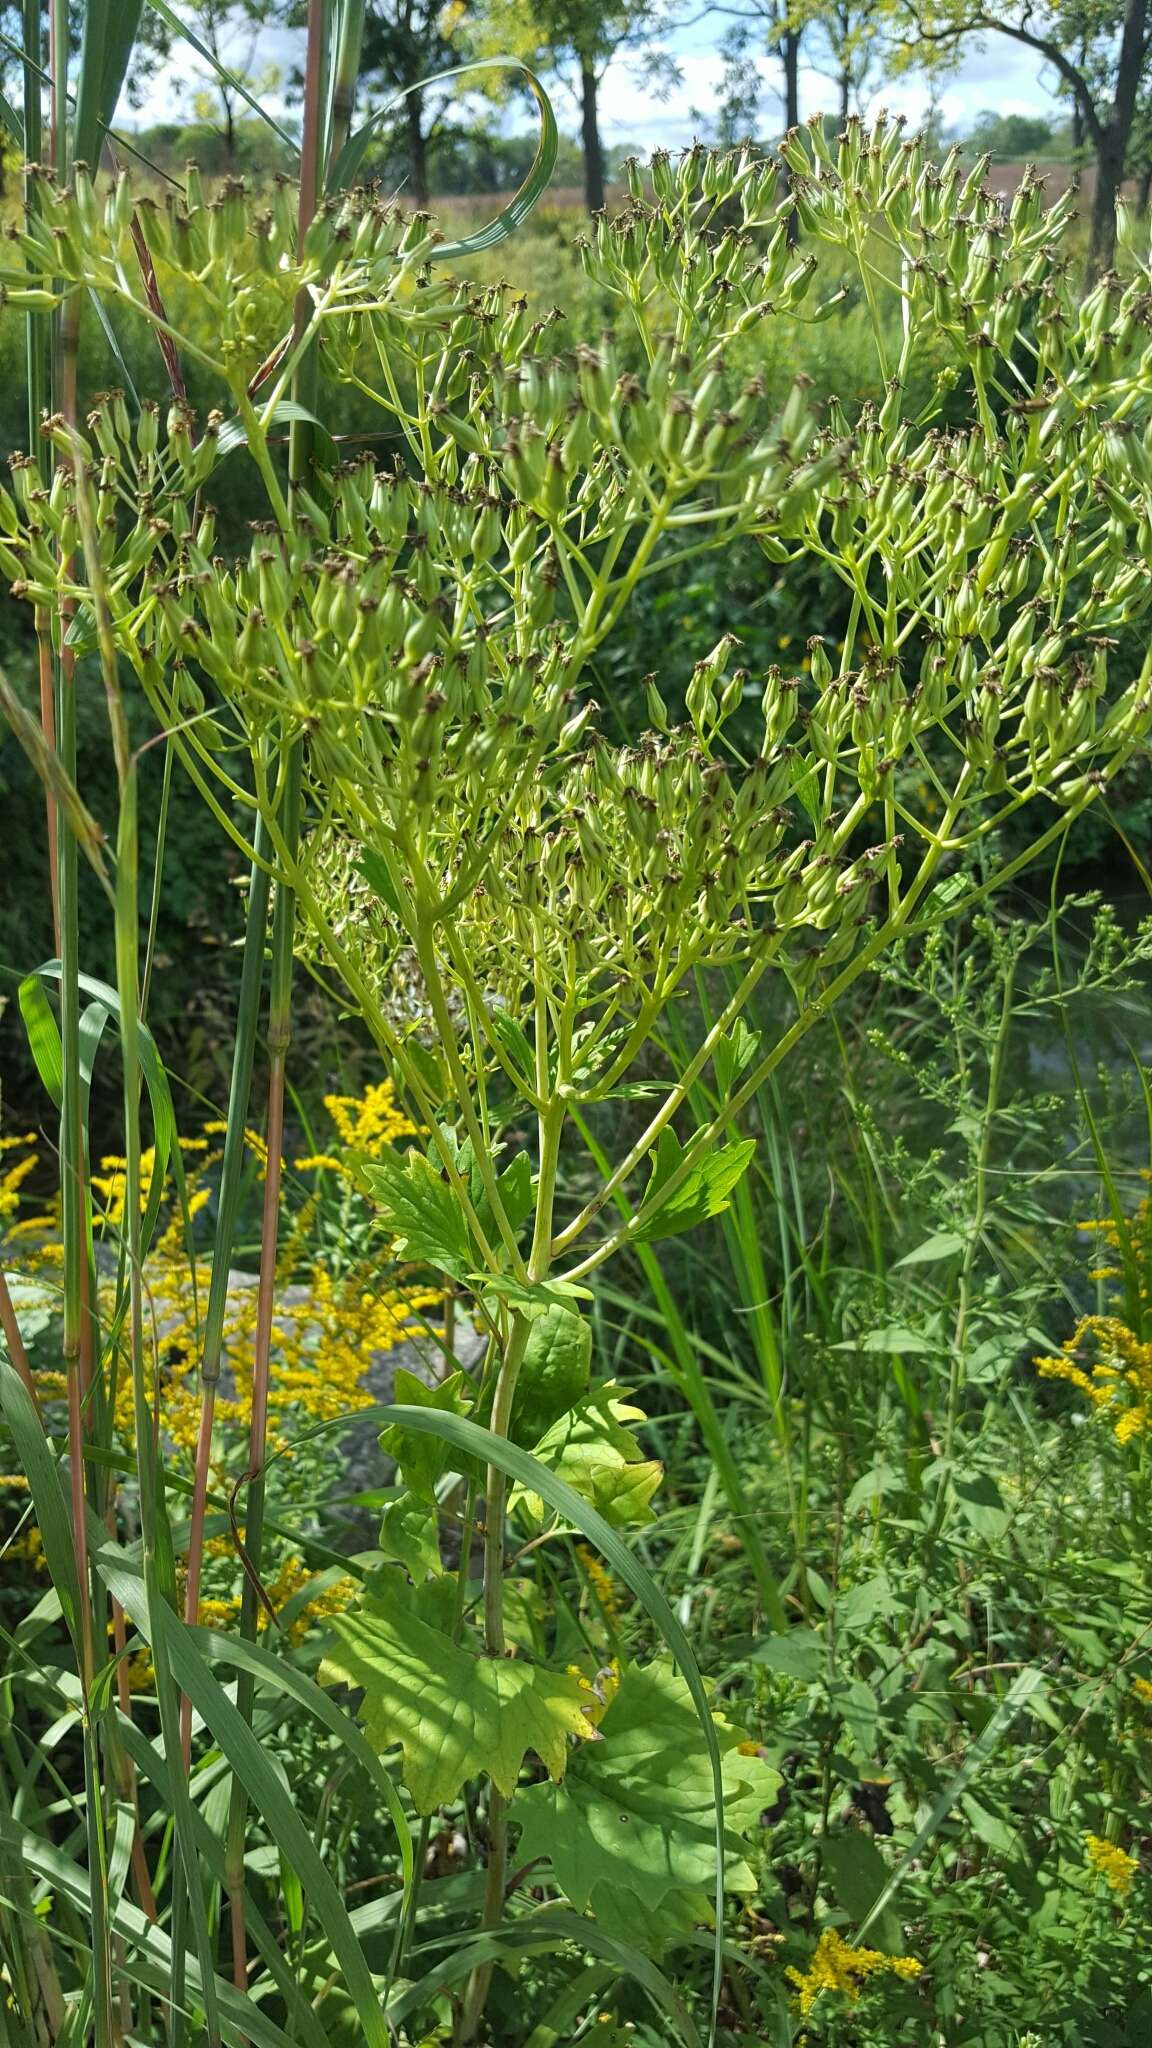 Image of pale Indian plantain